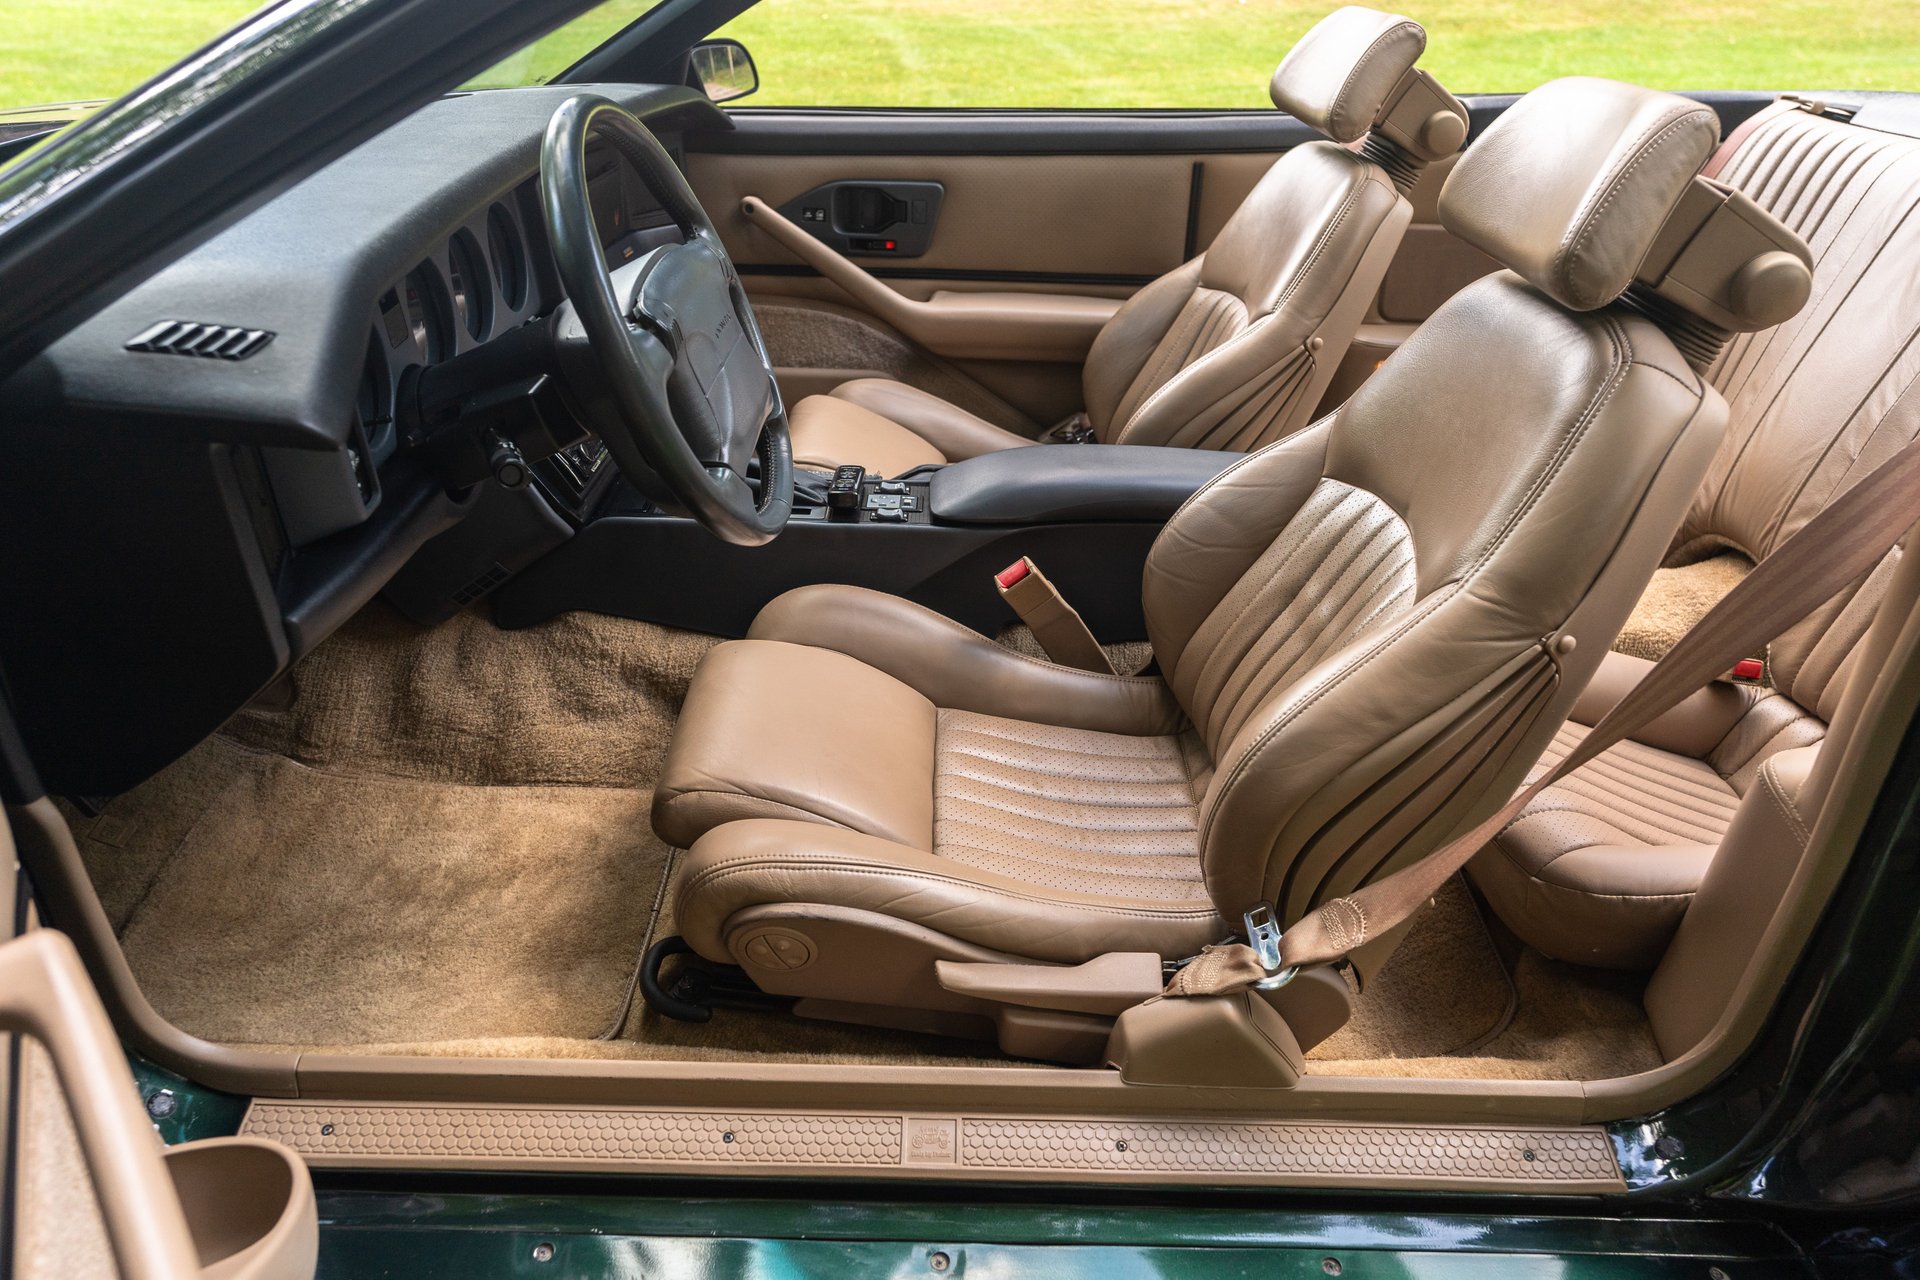 Rare Find 1992 Trans Am Convertible's Remarkable Condition